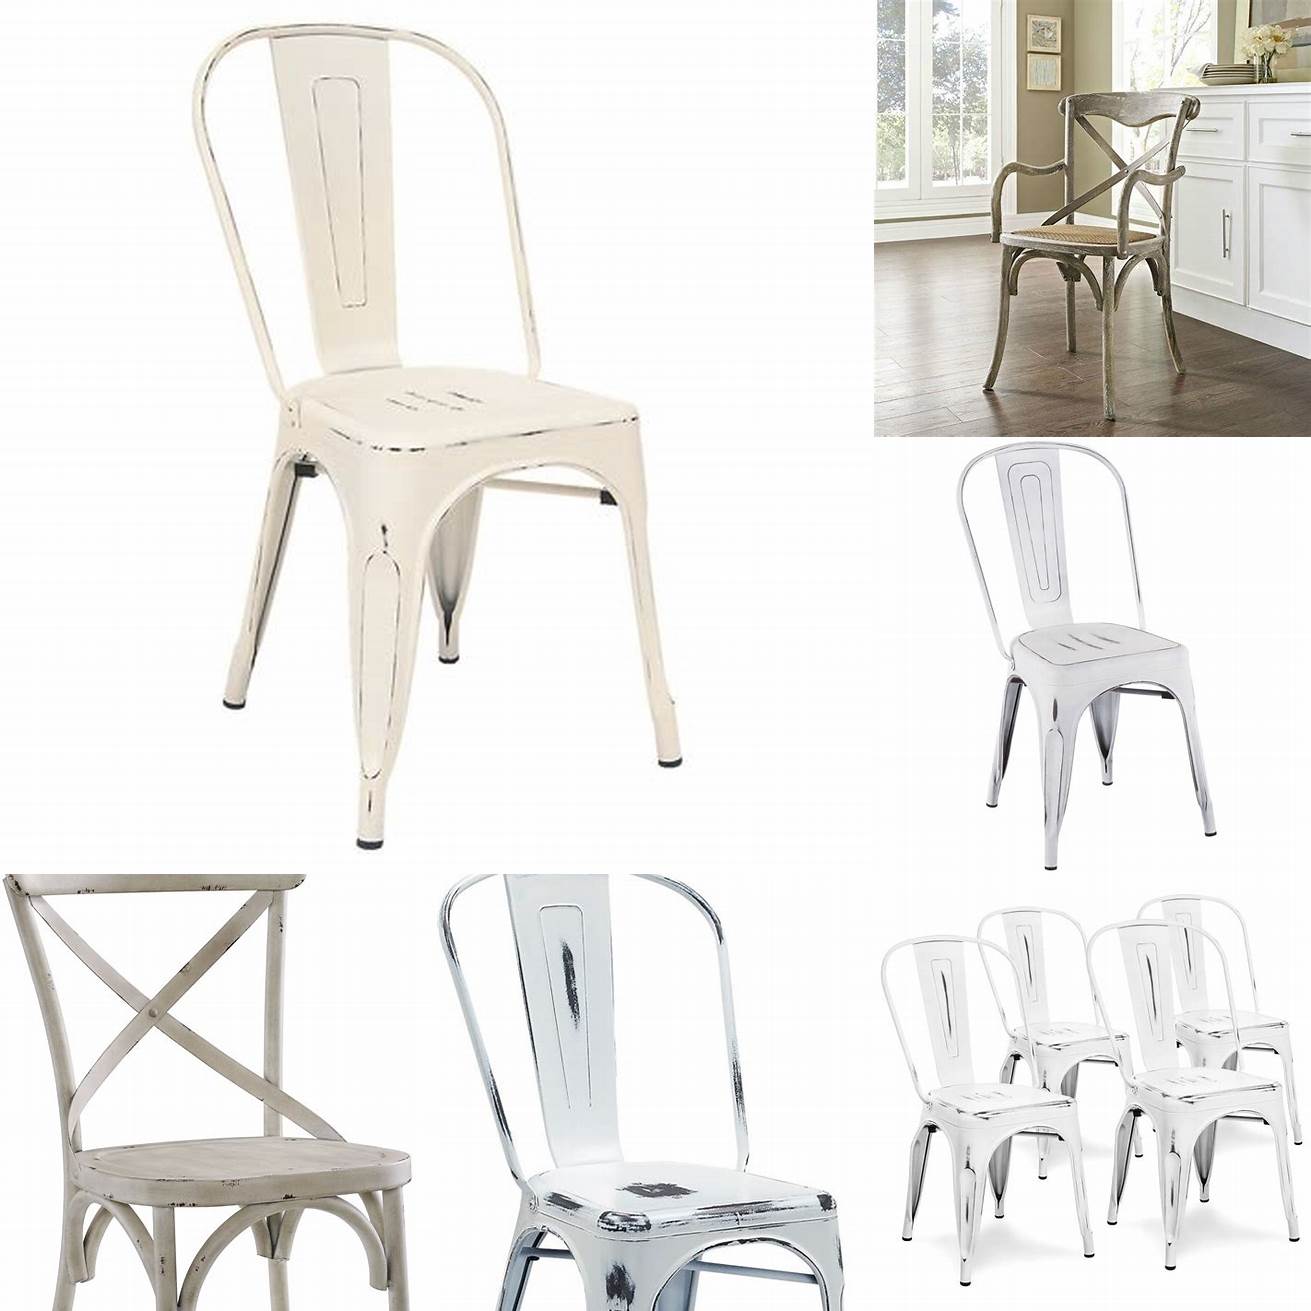 White metal chairs with a distressed finish